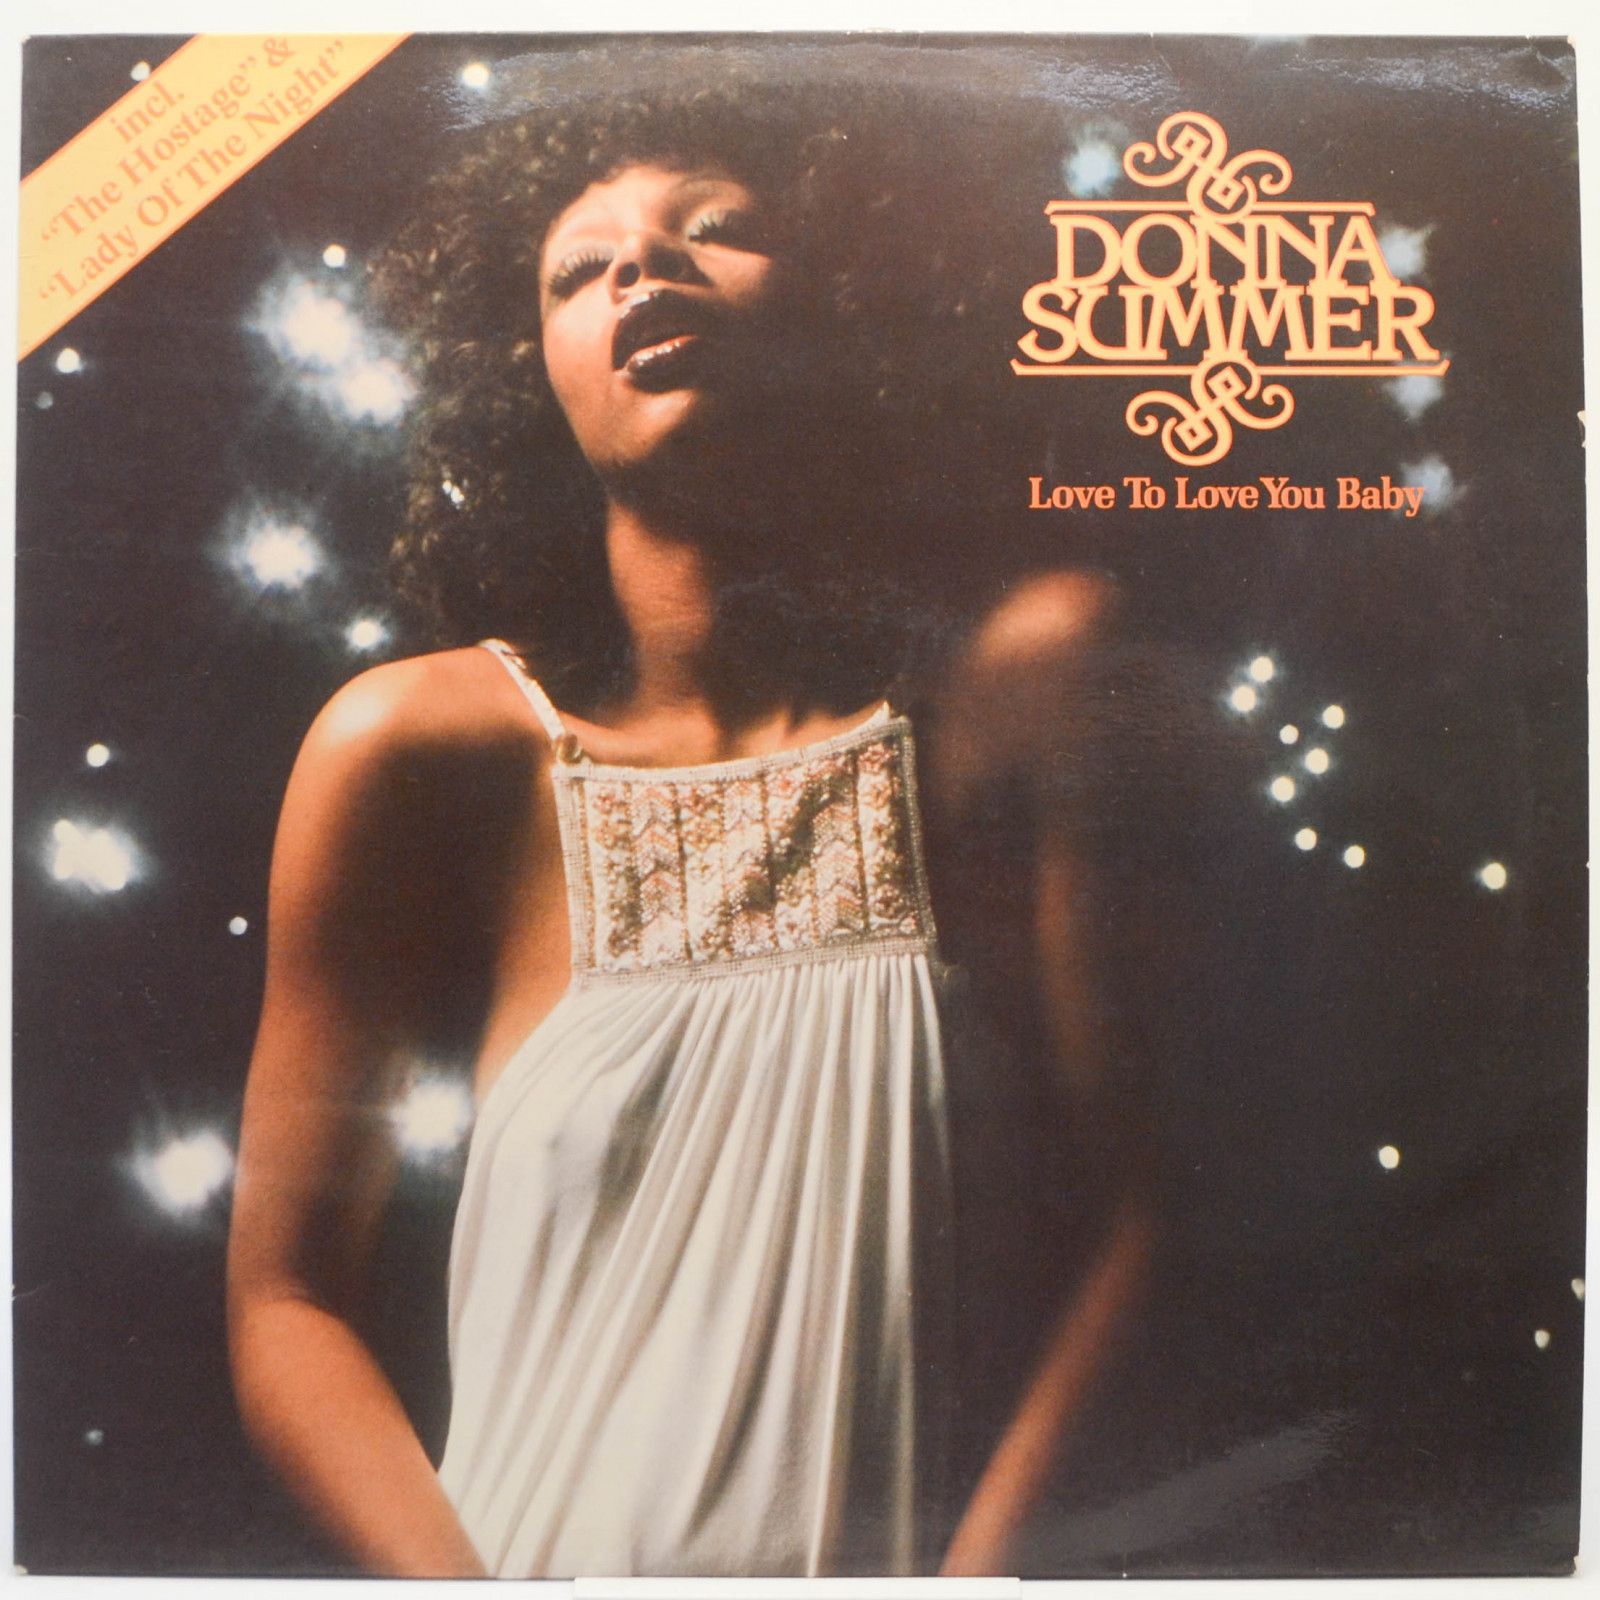 Donna Summer — Love To Love You Baby, 1975